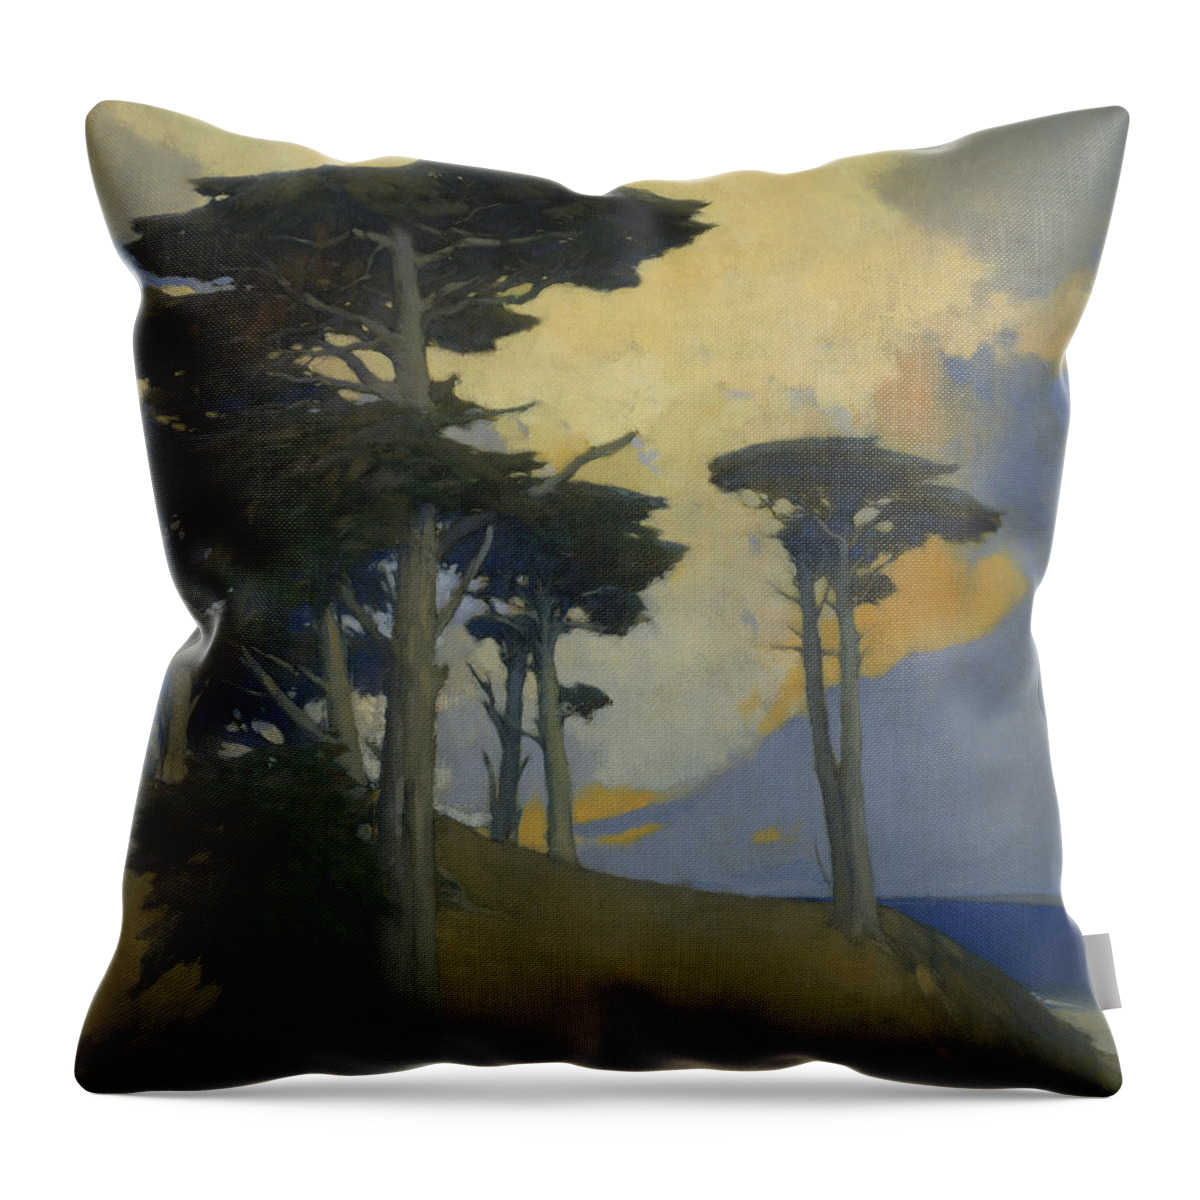 Monterey Cypress By Arthur Frank Mathews Throw Pillow featuring the painting Monterey Cypress #2 by Arthur Frank Mathews